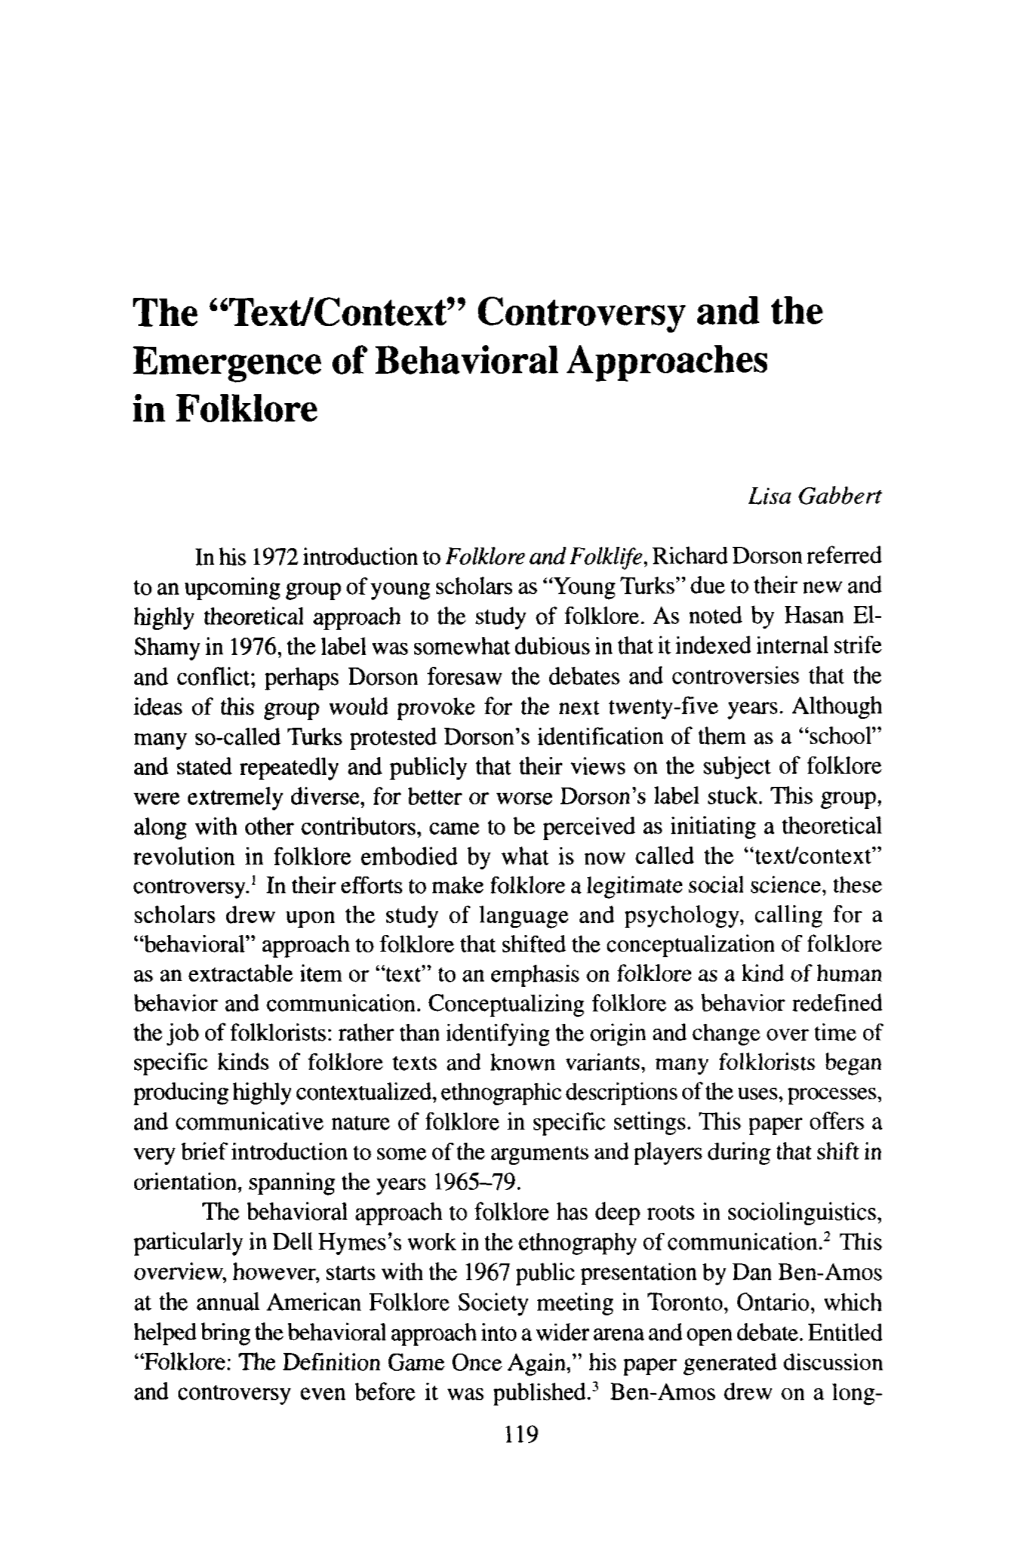 Controversy and the Emergence of Behavioral Approaches in Folklore